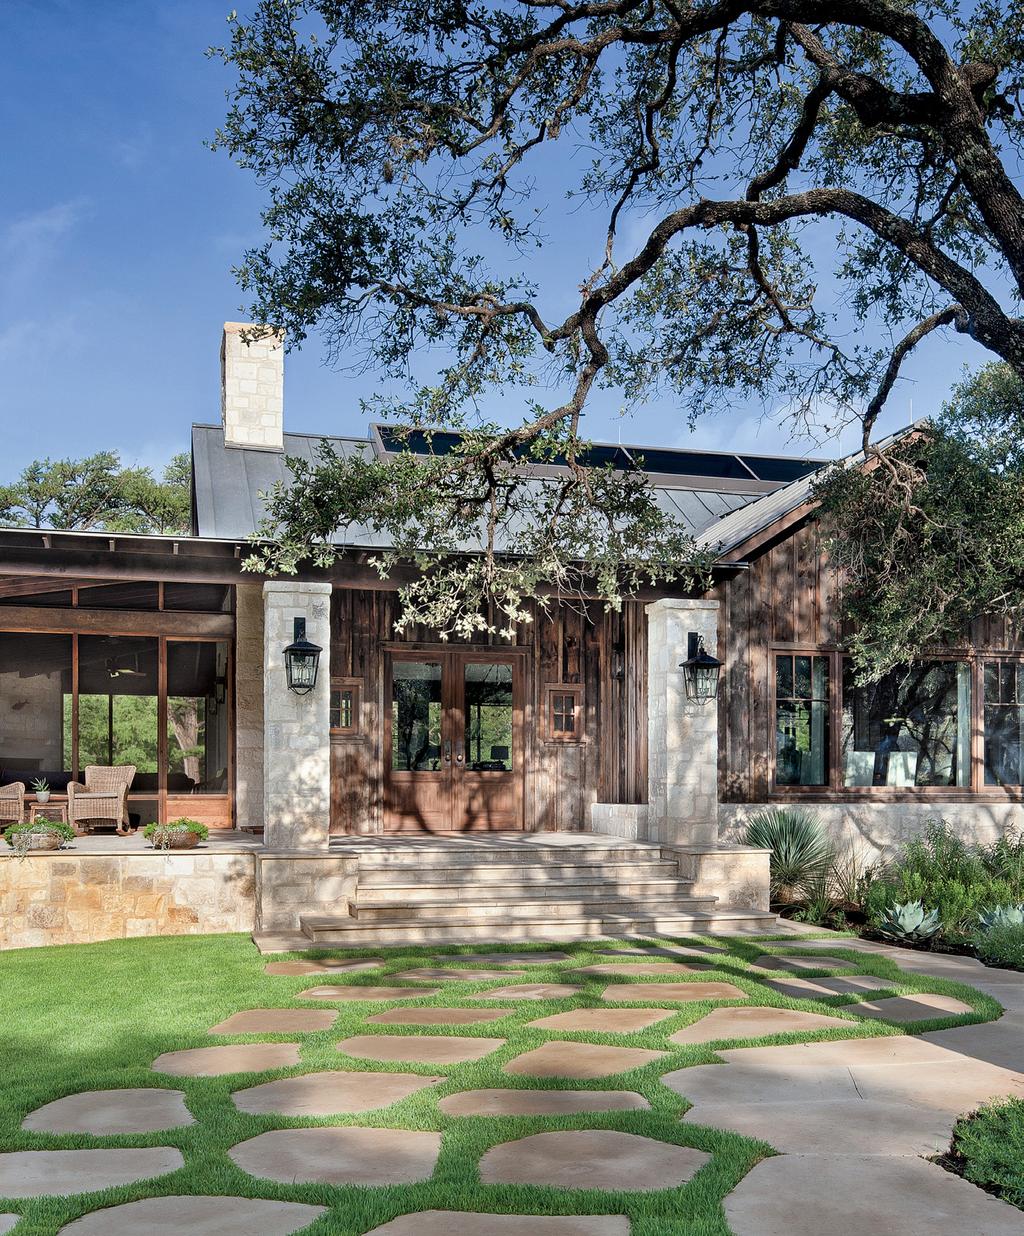 photograph by paul finkel family plan a design team creates a bright and open getaway in Texas Hill Country s F r i o C a ñ o n c o m